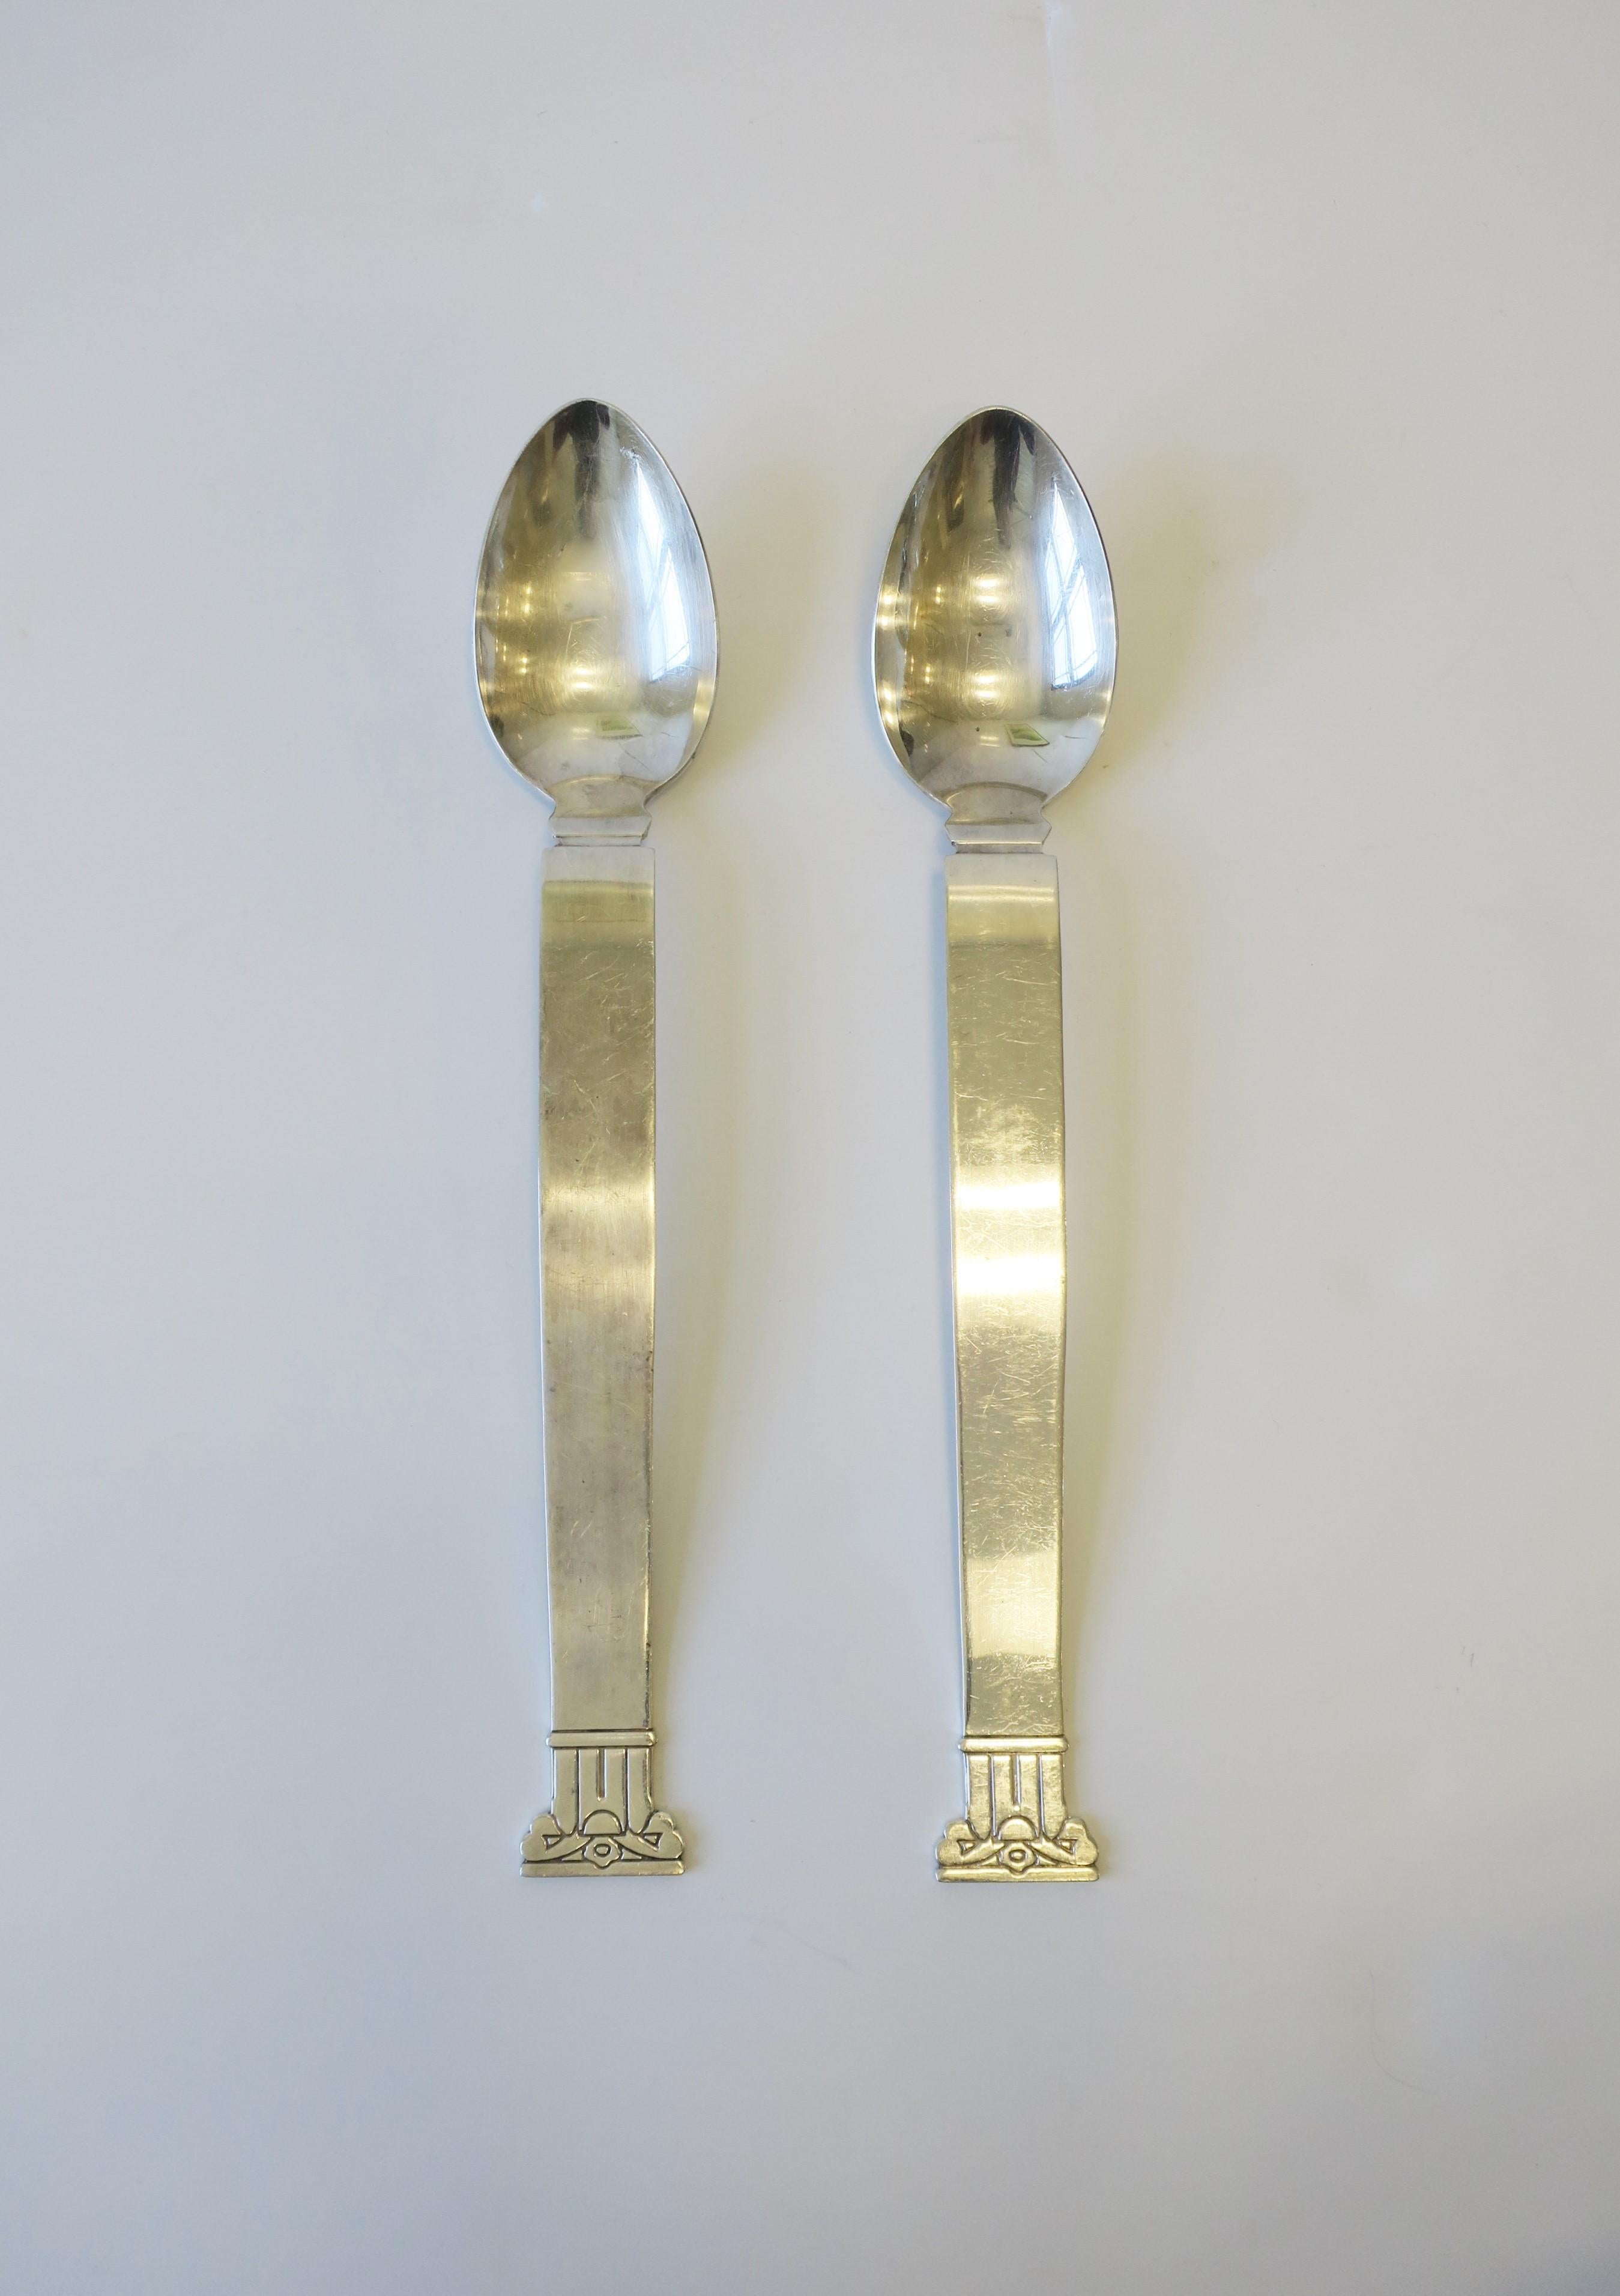 A beautiful, chic and substantial set of designer Postmodern sterling silver-plate serving, salad or platter spoons with a Neoclassical pillar column handle design, designed by Robert Venturi for Swid Powell, circa 1990s. Each measure: 14.25